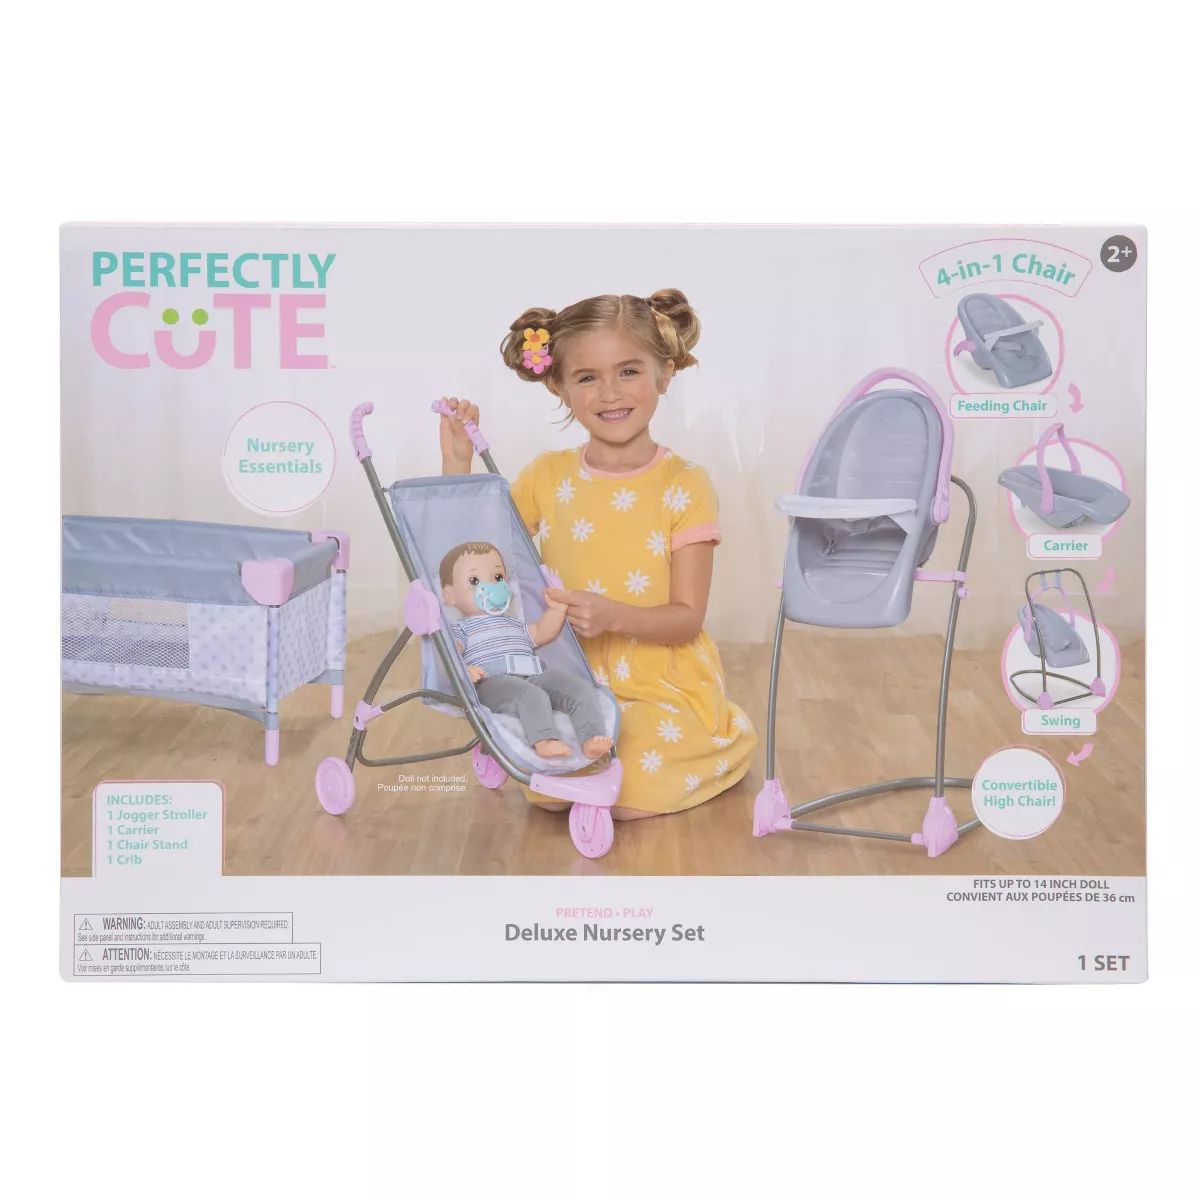 Perfectly Cute Deluxe Nursery Baby Doll Playset | Target